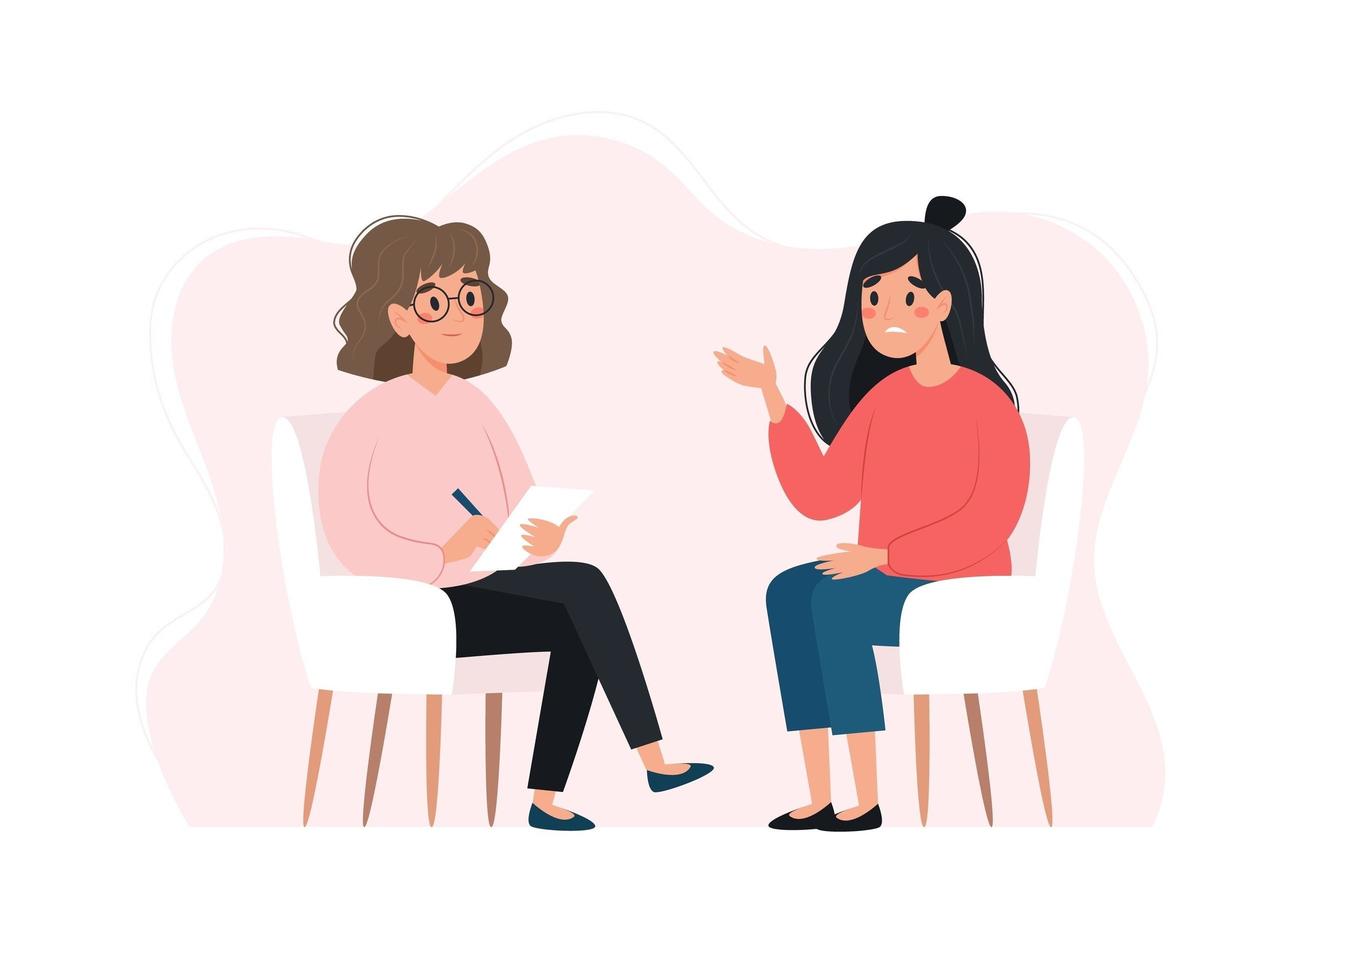 Psychotherapy session - woman talking to psychologist. Mental health concept, vector illustration in flat style